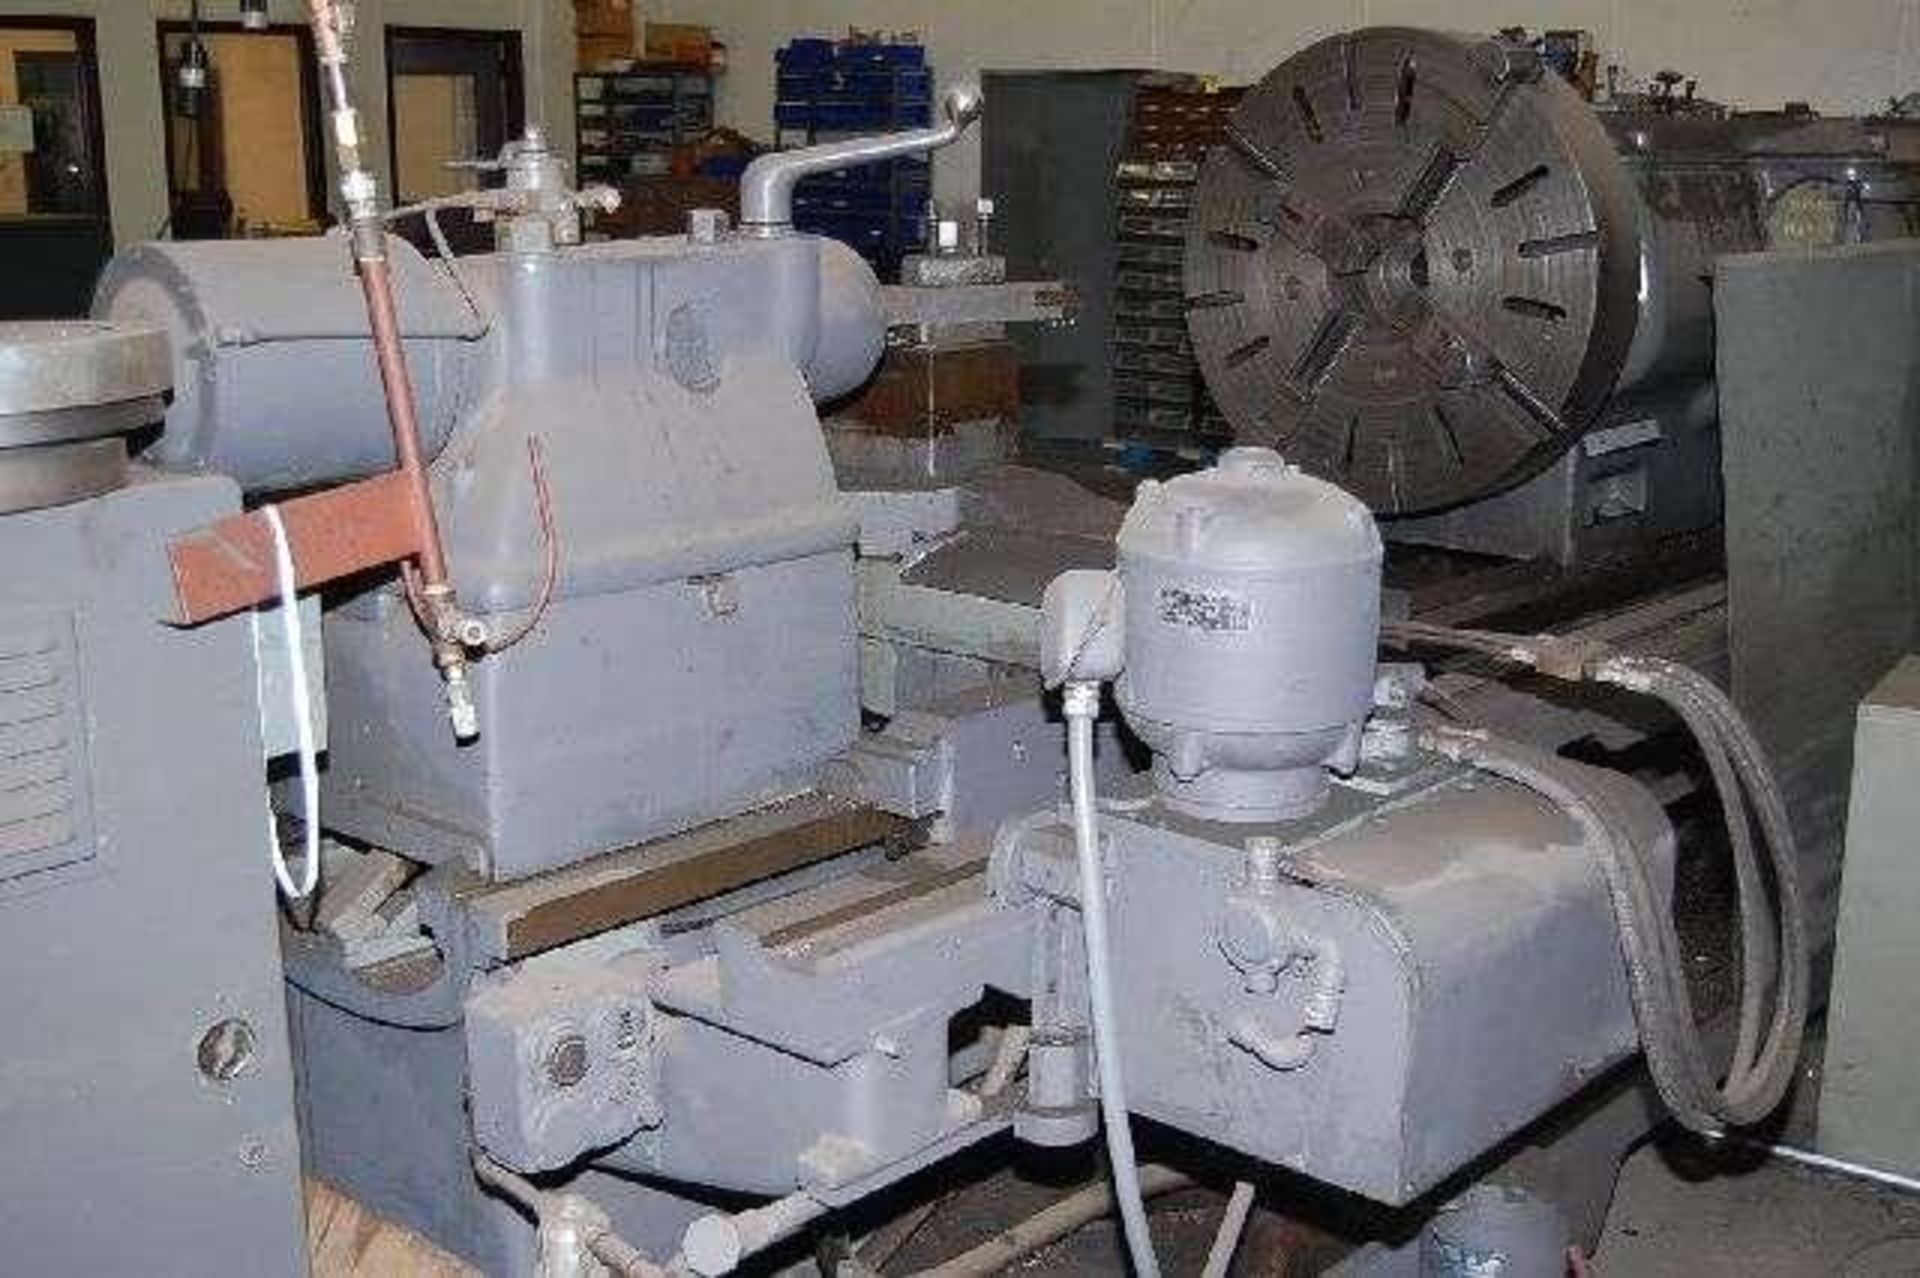 Monarch Lathe, 40” x 48”, Model 25N, 31” 4-Jaw Chuck, Power Quill Tailstock, Tracer Attachment, 25